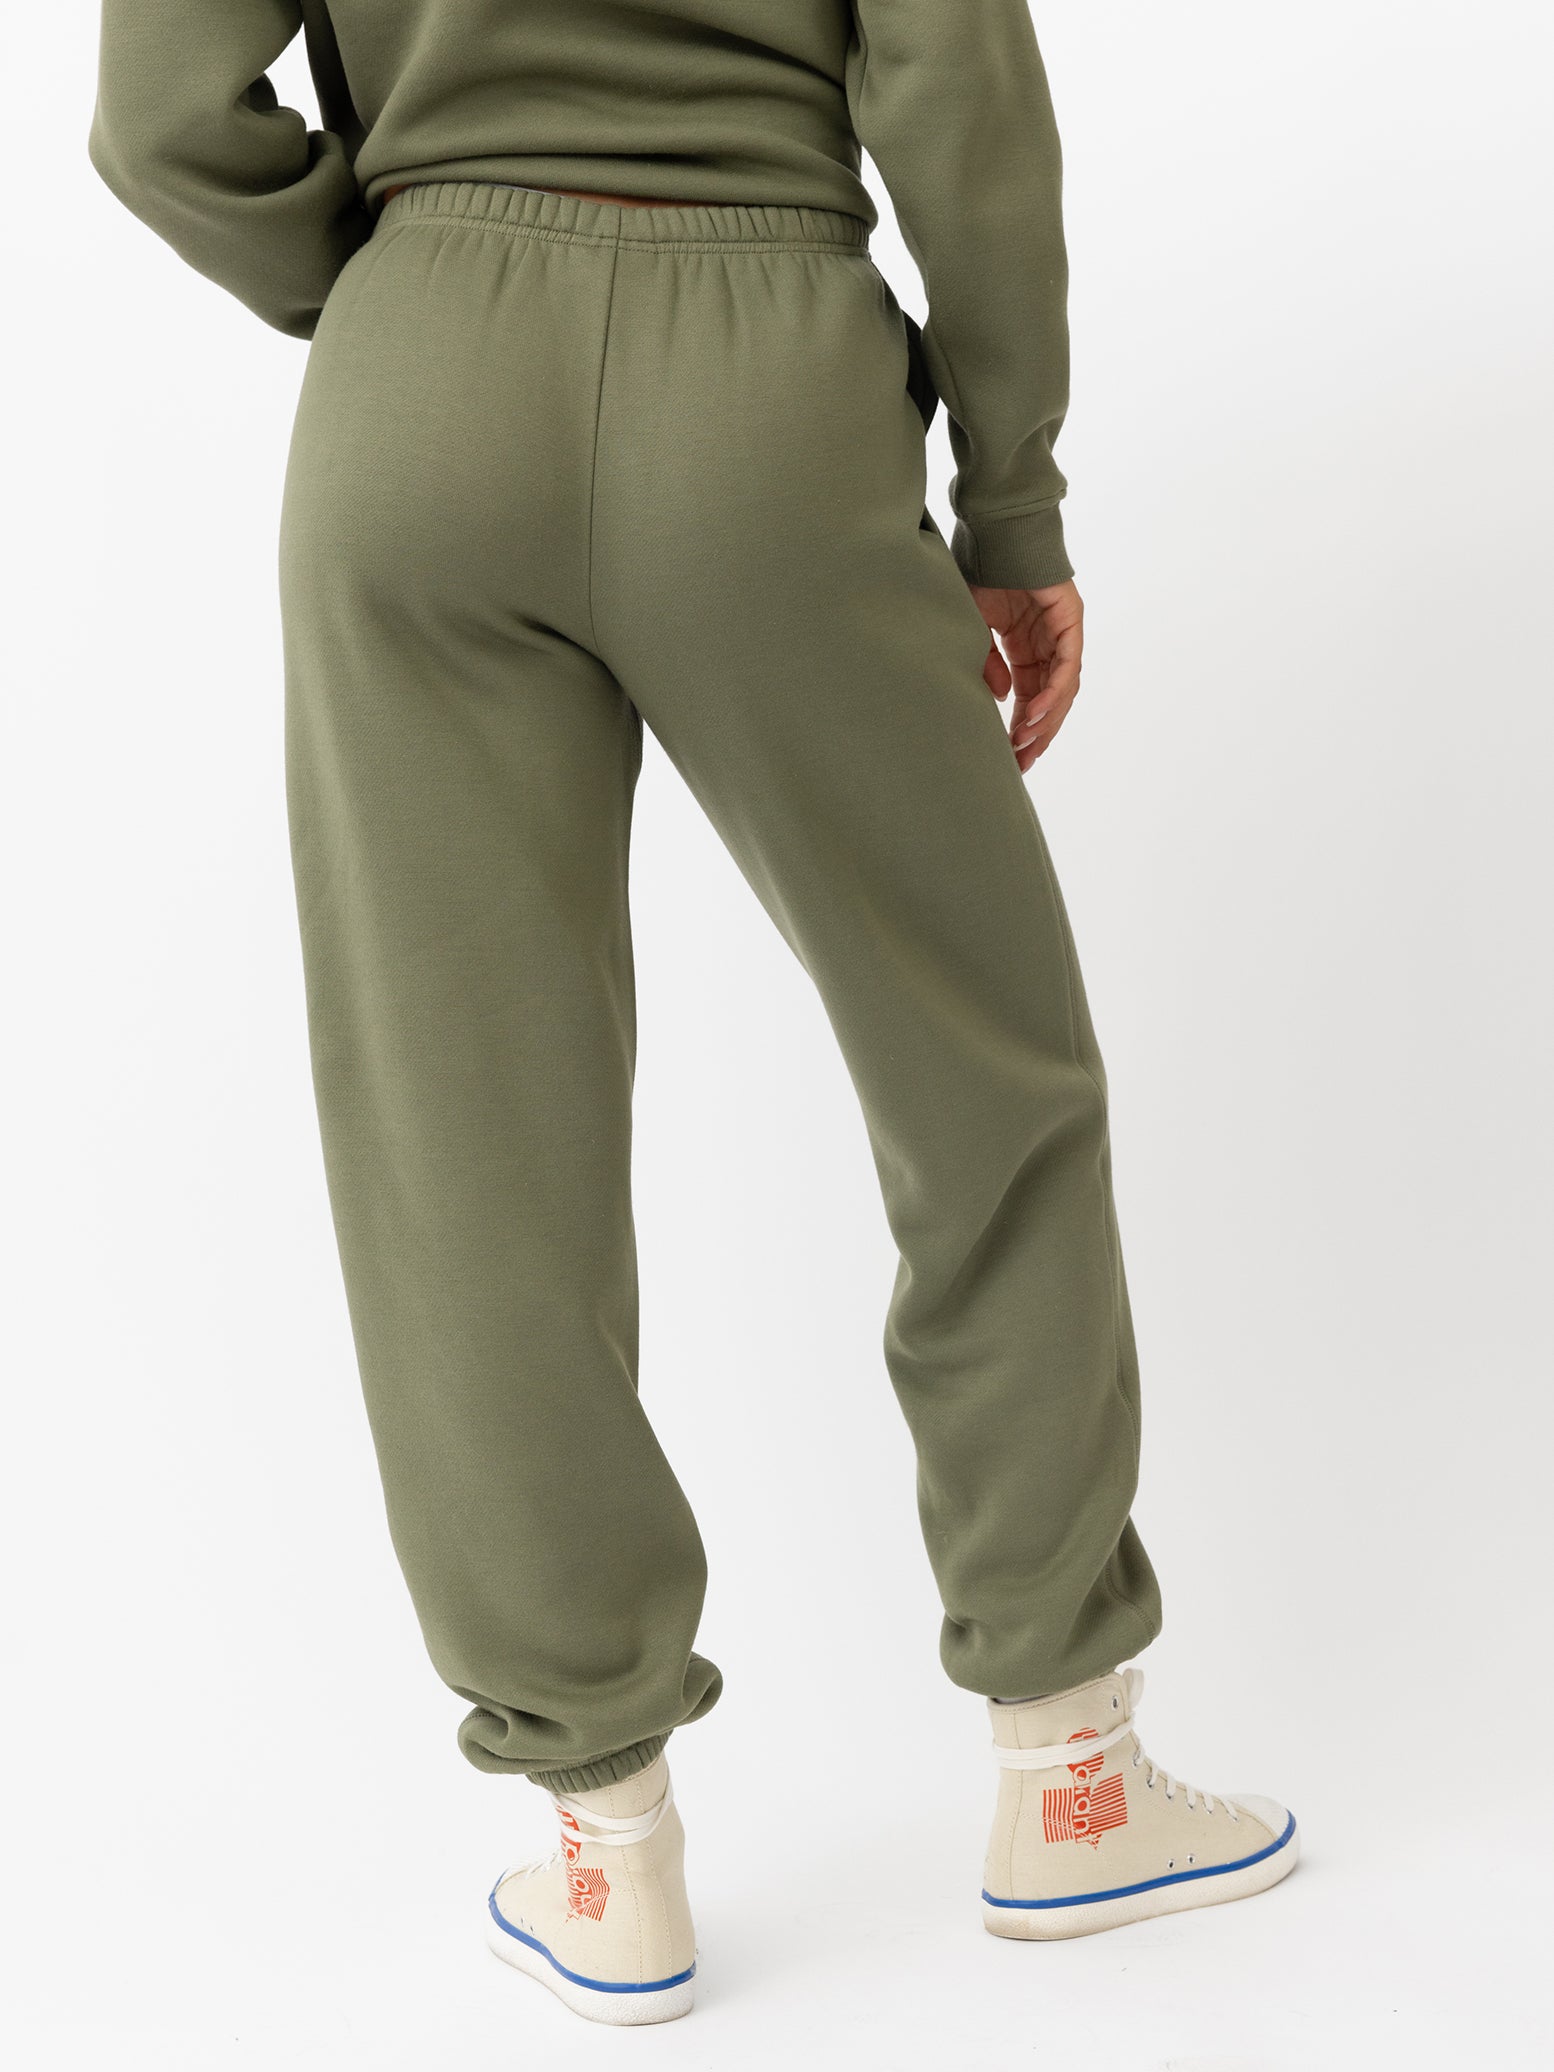  Woman wearing Juniper CityScape Sweat Pant with white background 